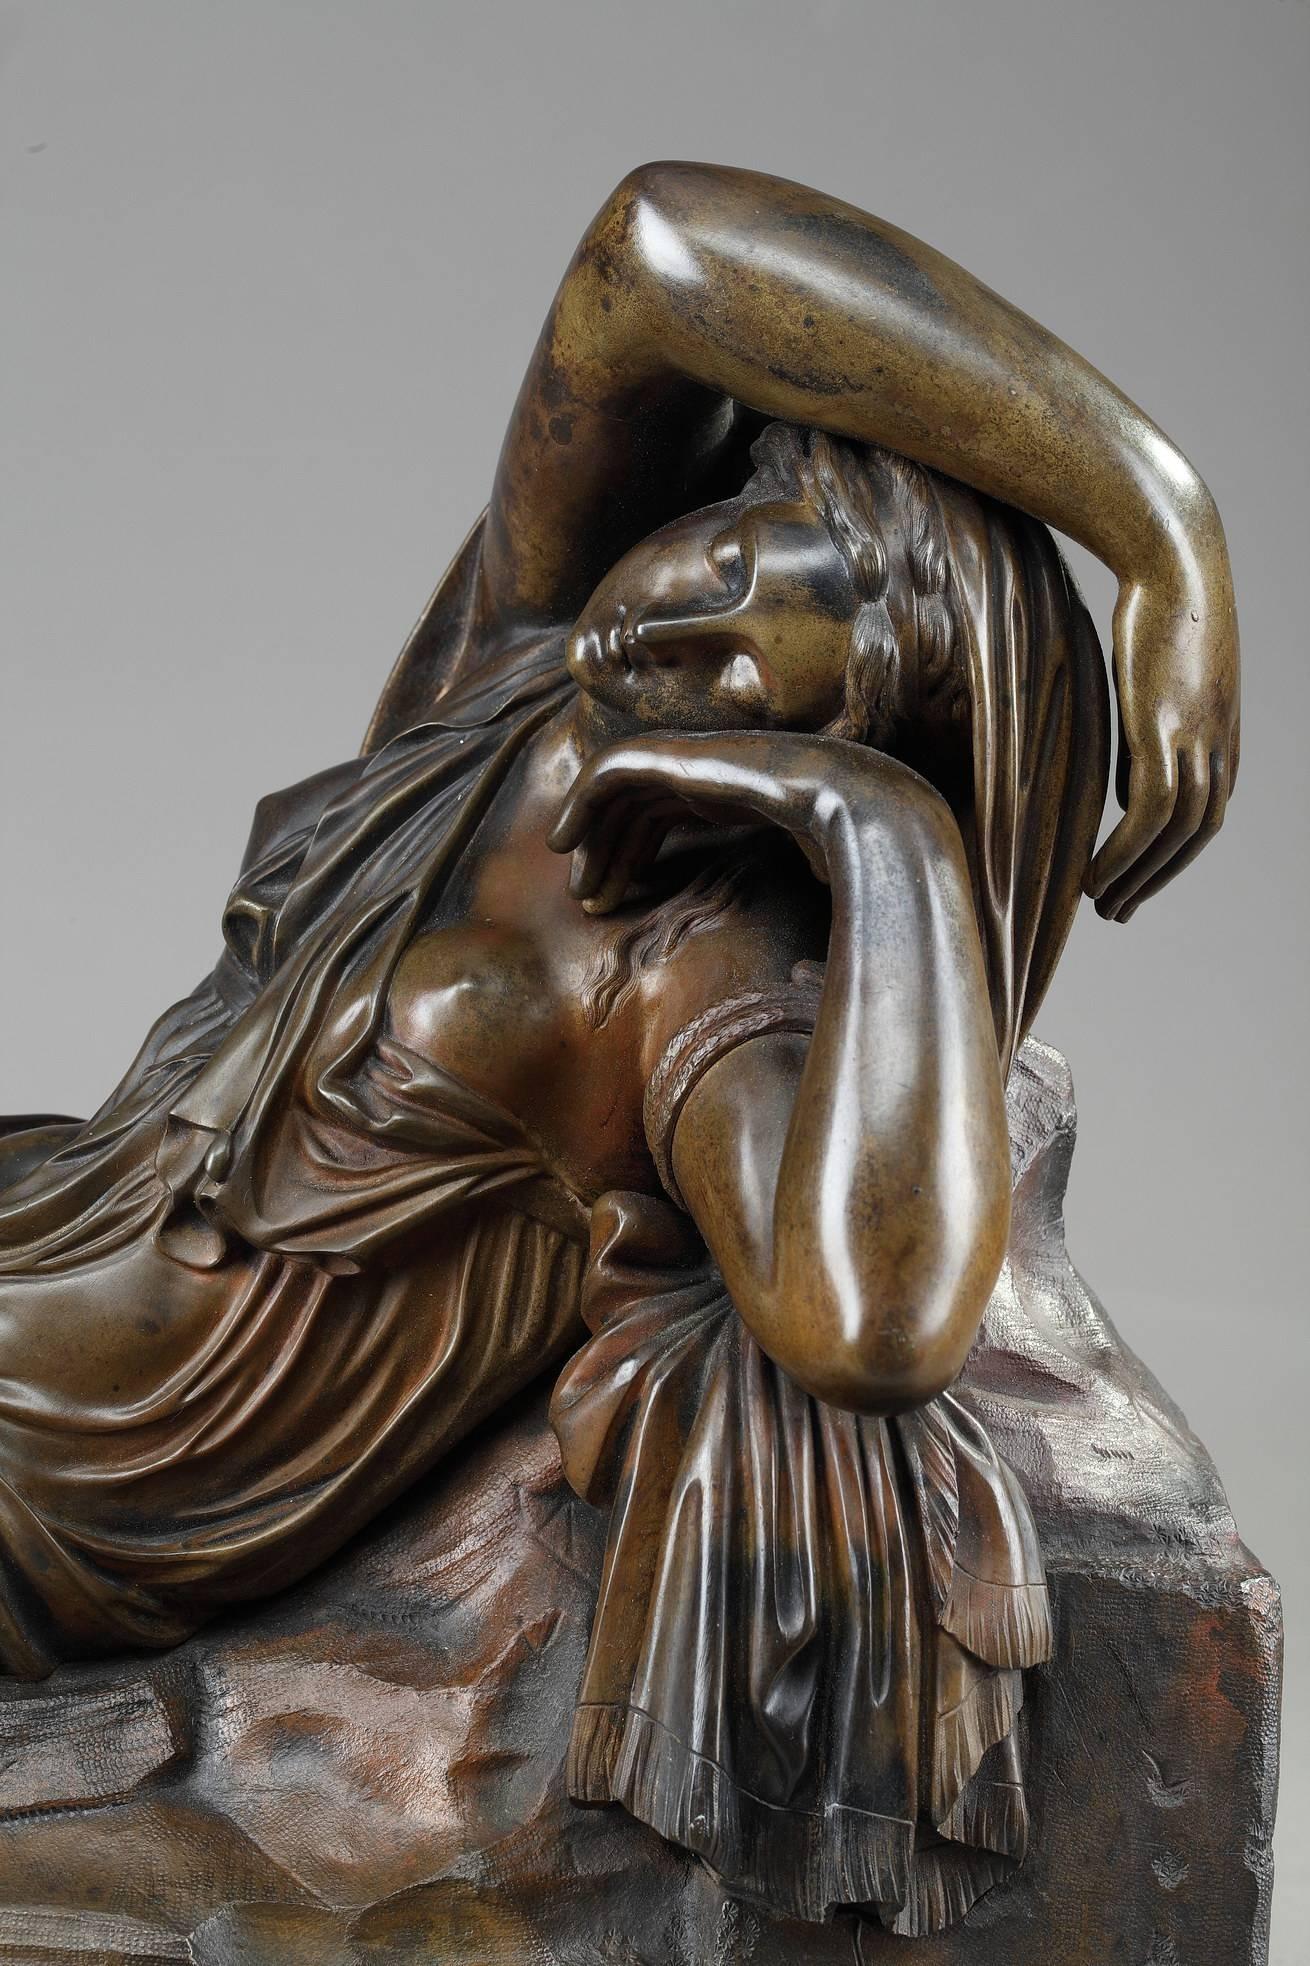 19th century bronze casting of the sleeping goddess Ariadne, after the antique version housed in the Vatican Museums, in Rome. Mounted onto a black marble base. Numbered 713.

The statue of Ariadne sleeping was acquired by Pope Julius II